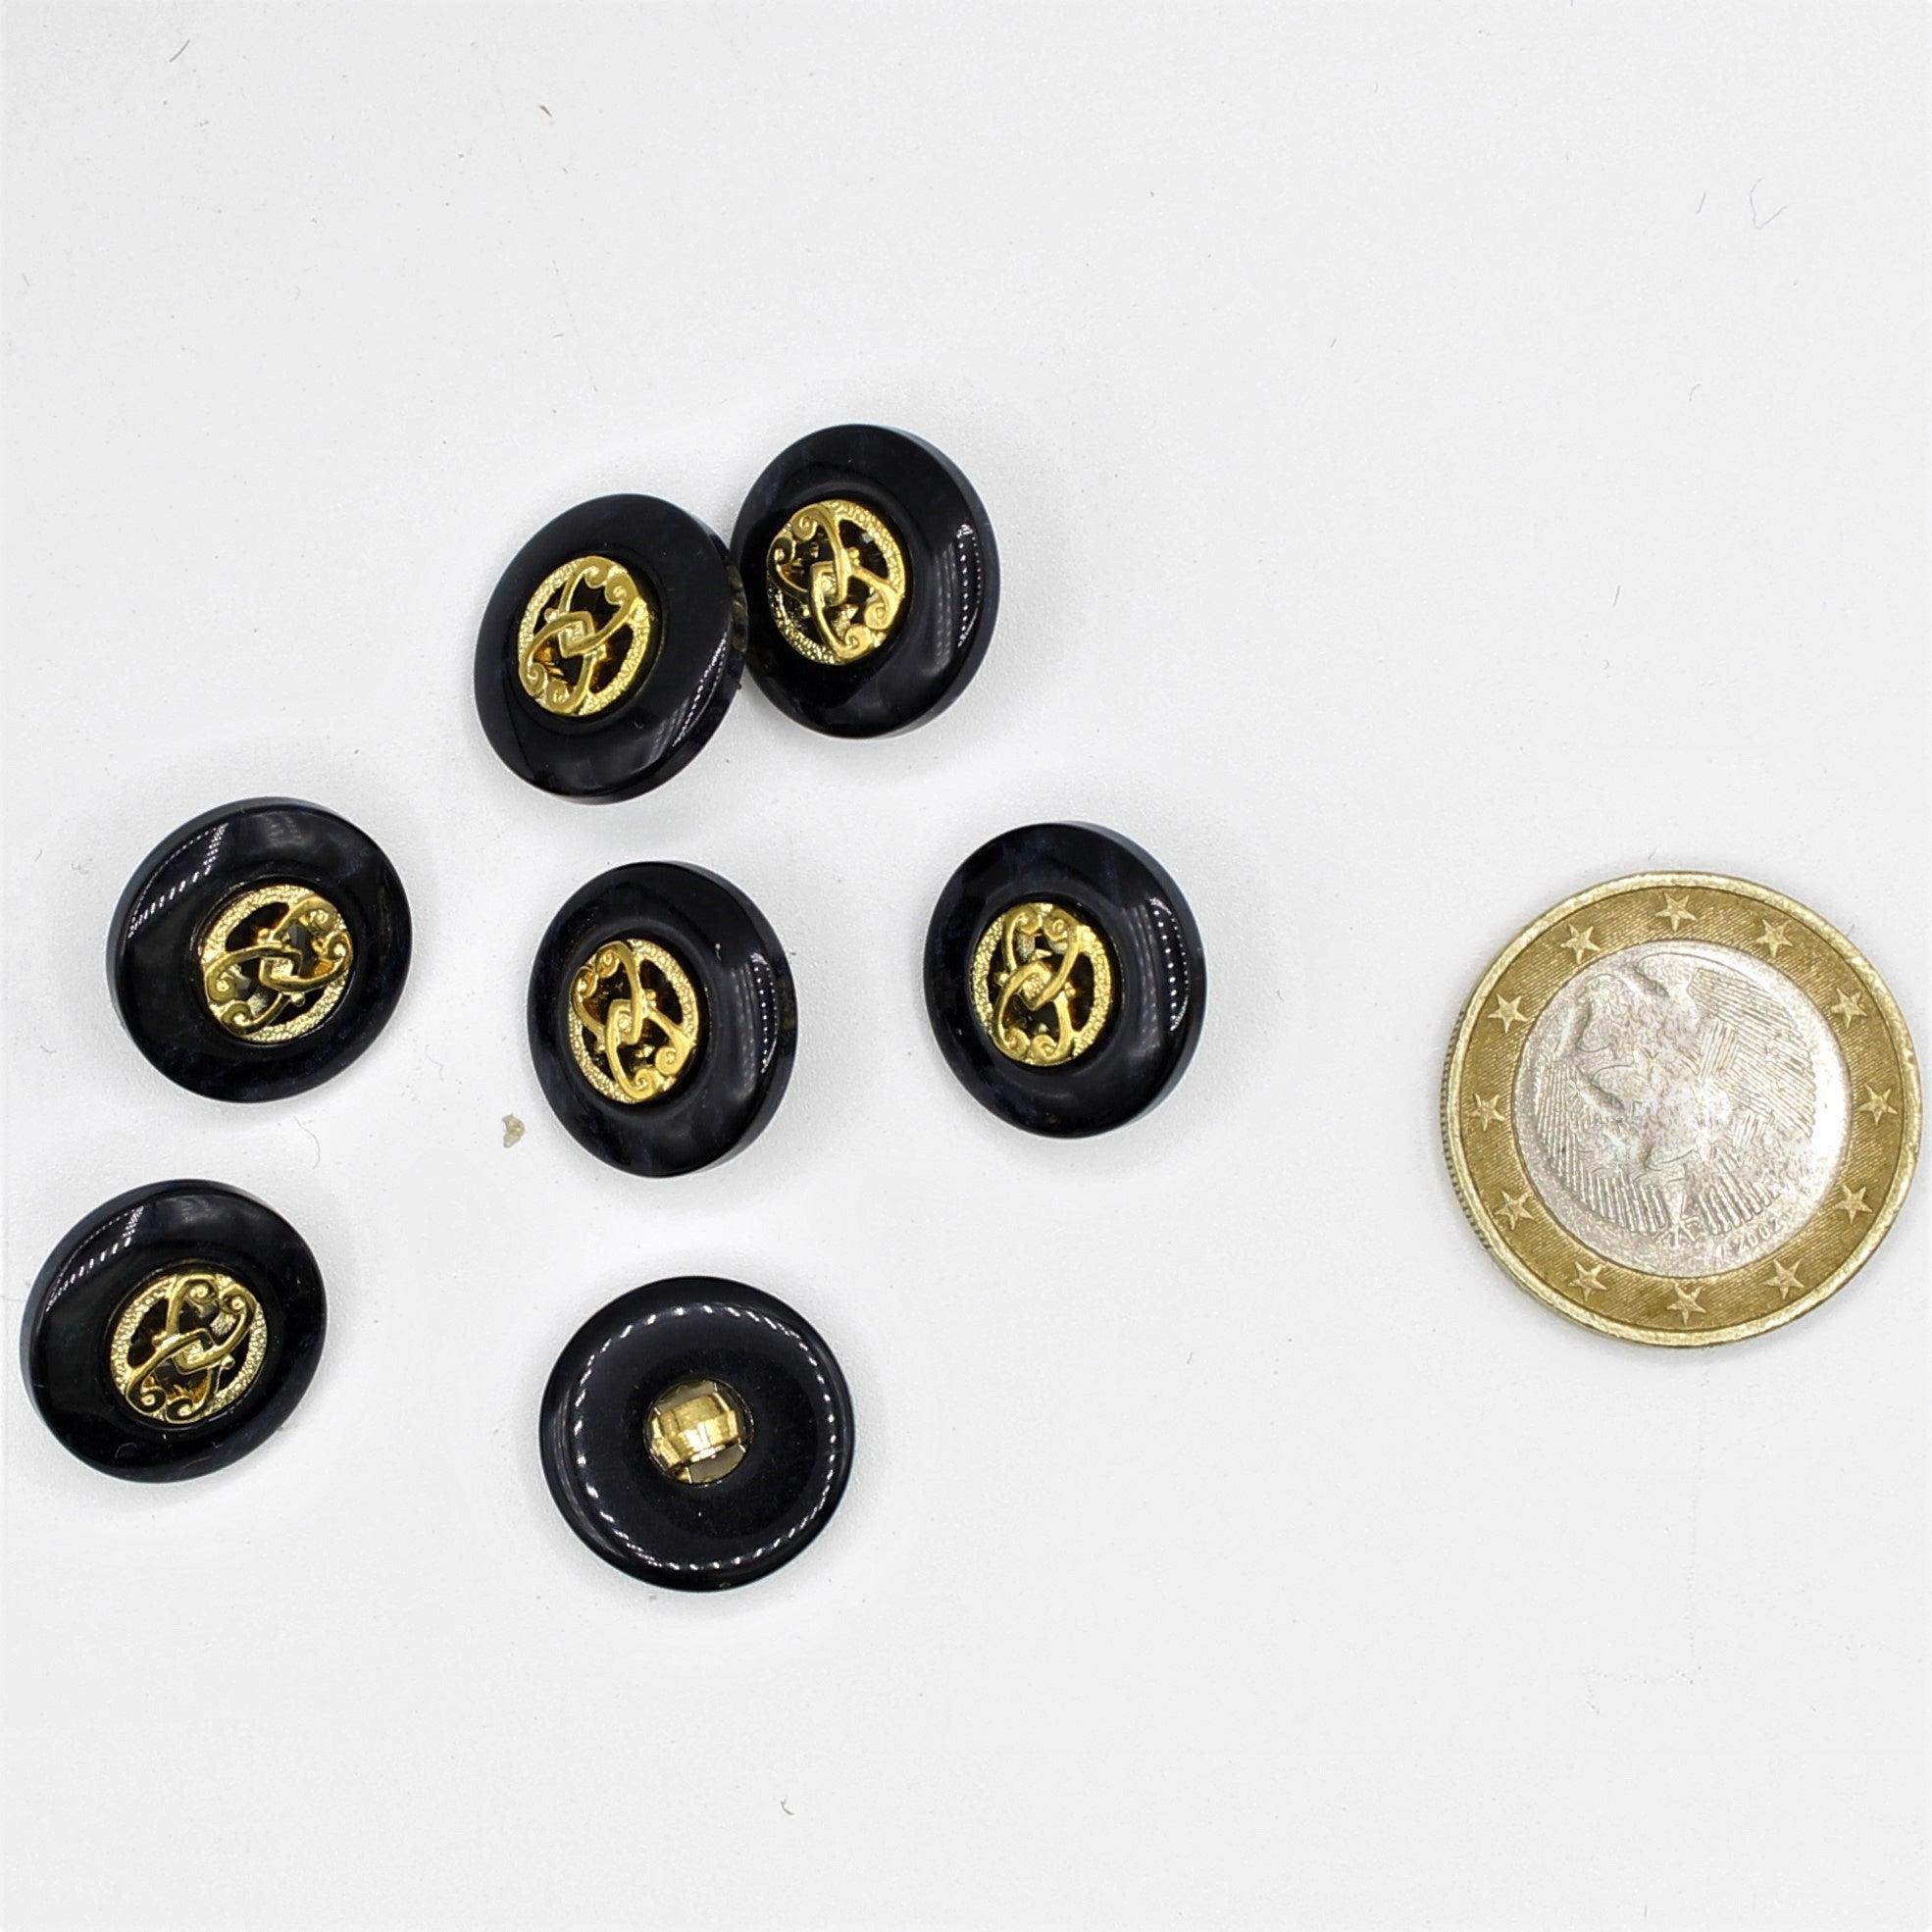 6 mm Dark Blue Button with Gold Pattern - ACCESSOIRES LEDUC